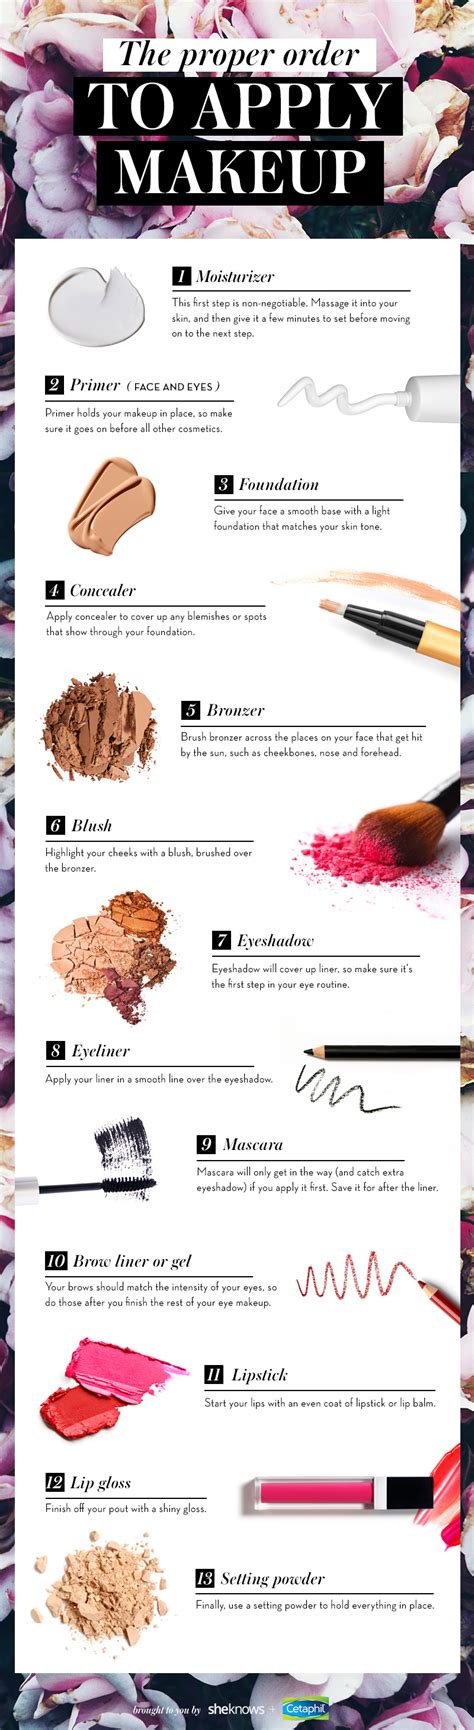 yes there is a correct makeup application order and this is it sheknows